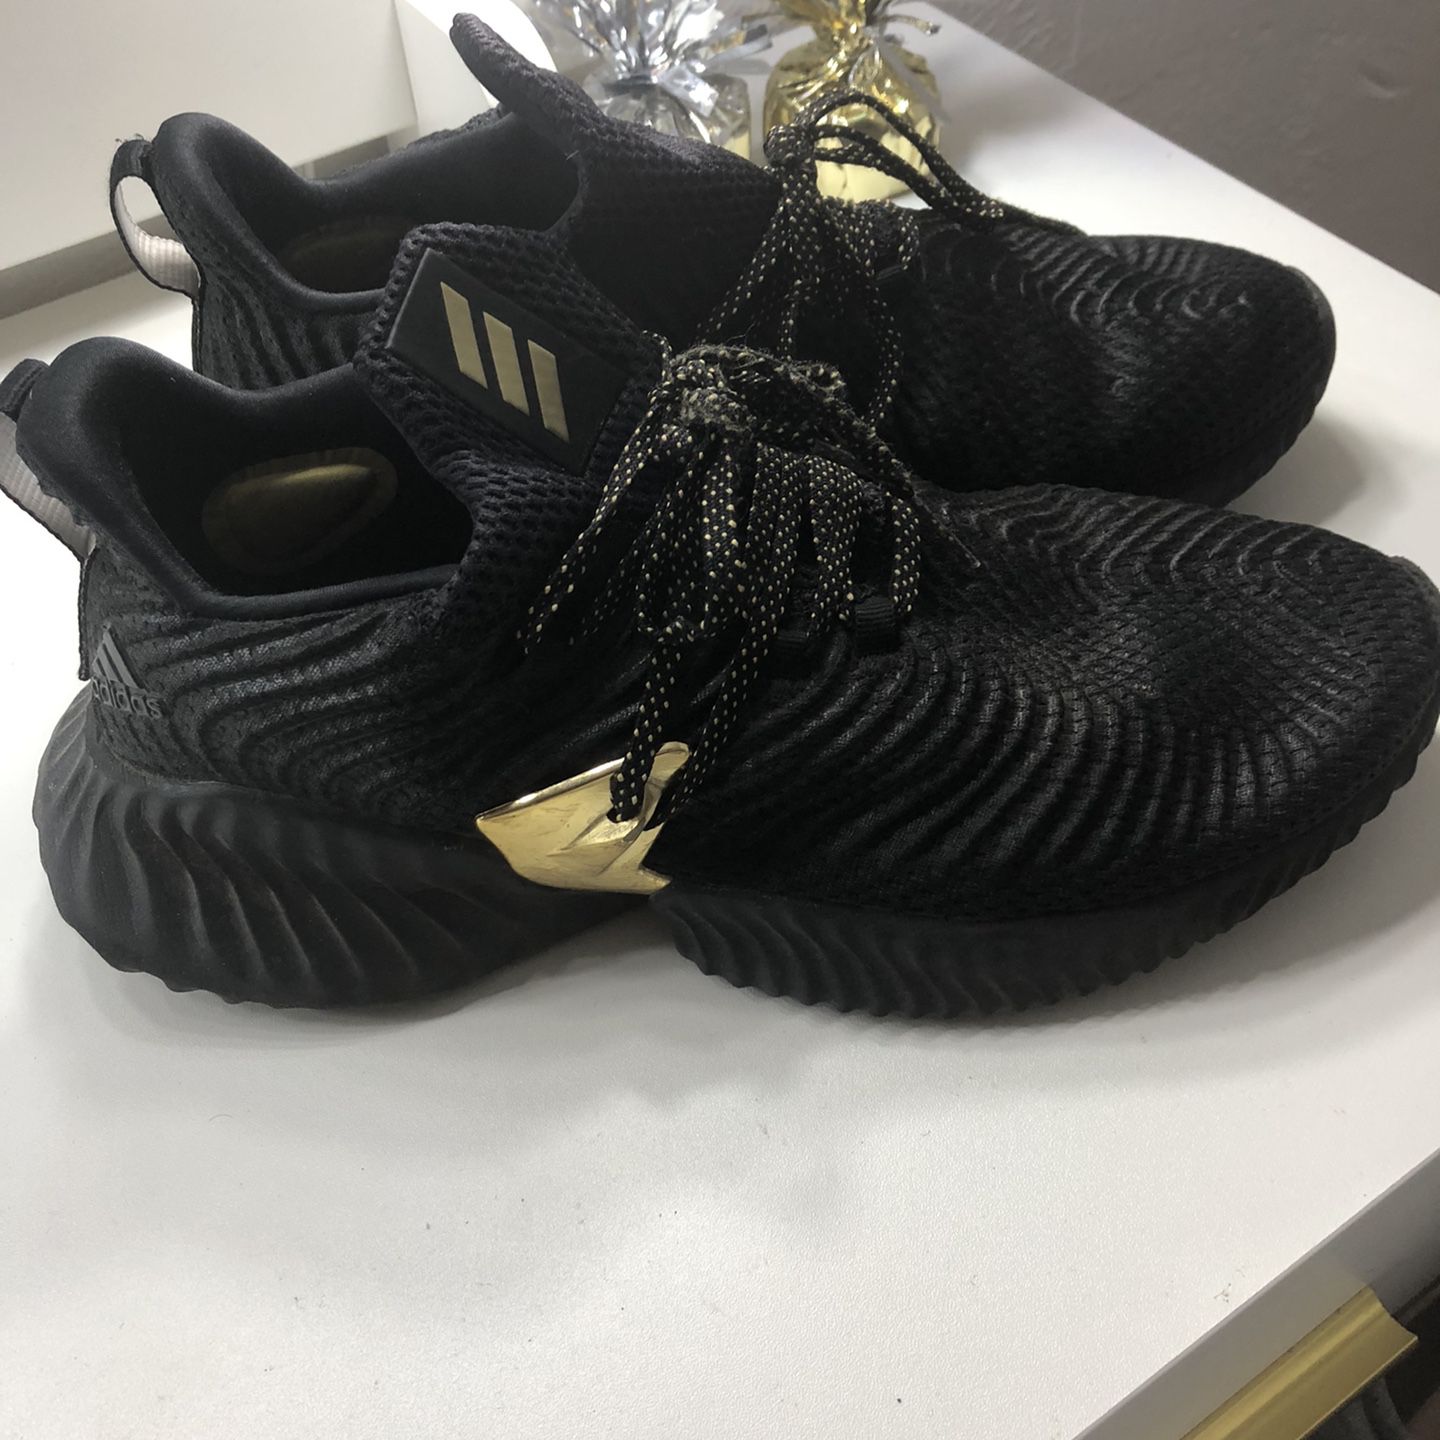 Adidas Alphabounce Shoe Size for Sale in Dallas, TX - OfferUp